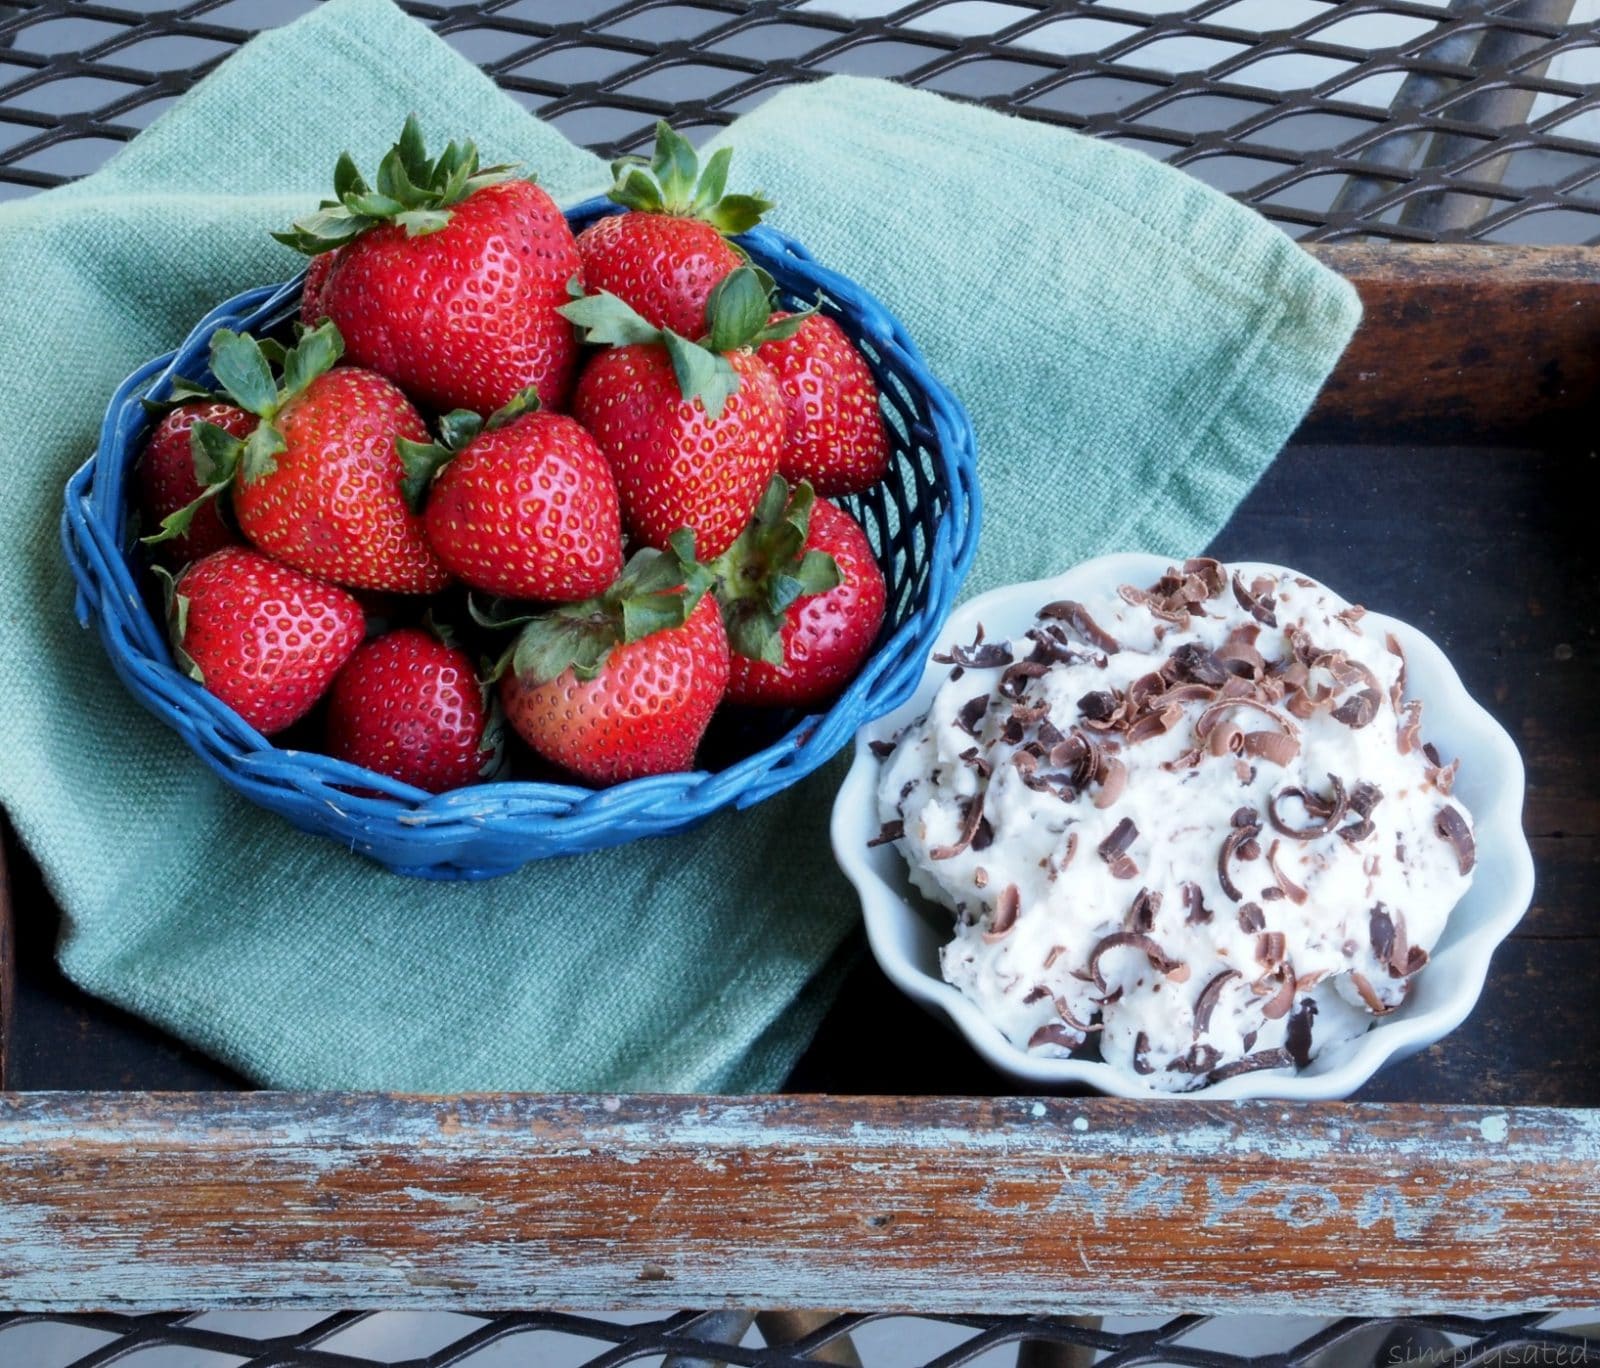 Strawberries & Cream with Chocolate is a beautiful and easy dessert or appetizer.